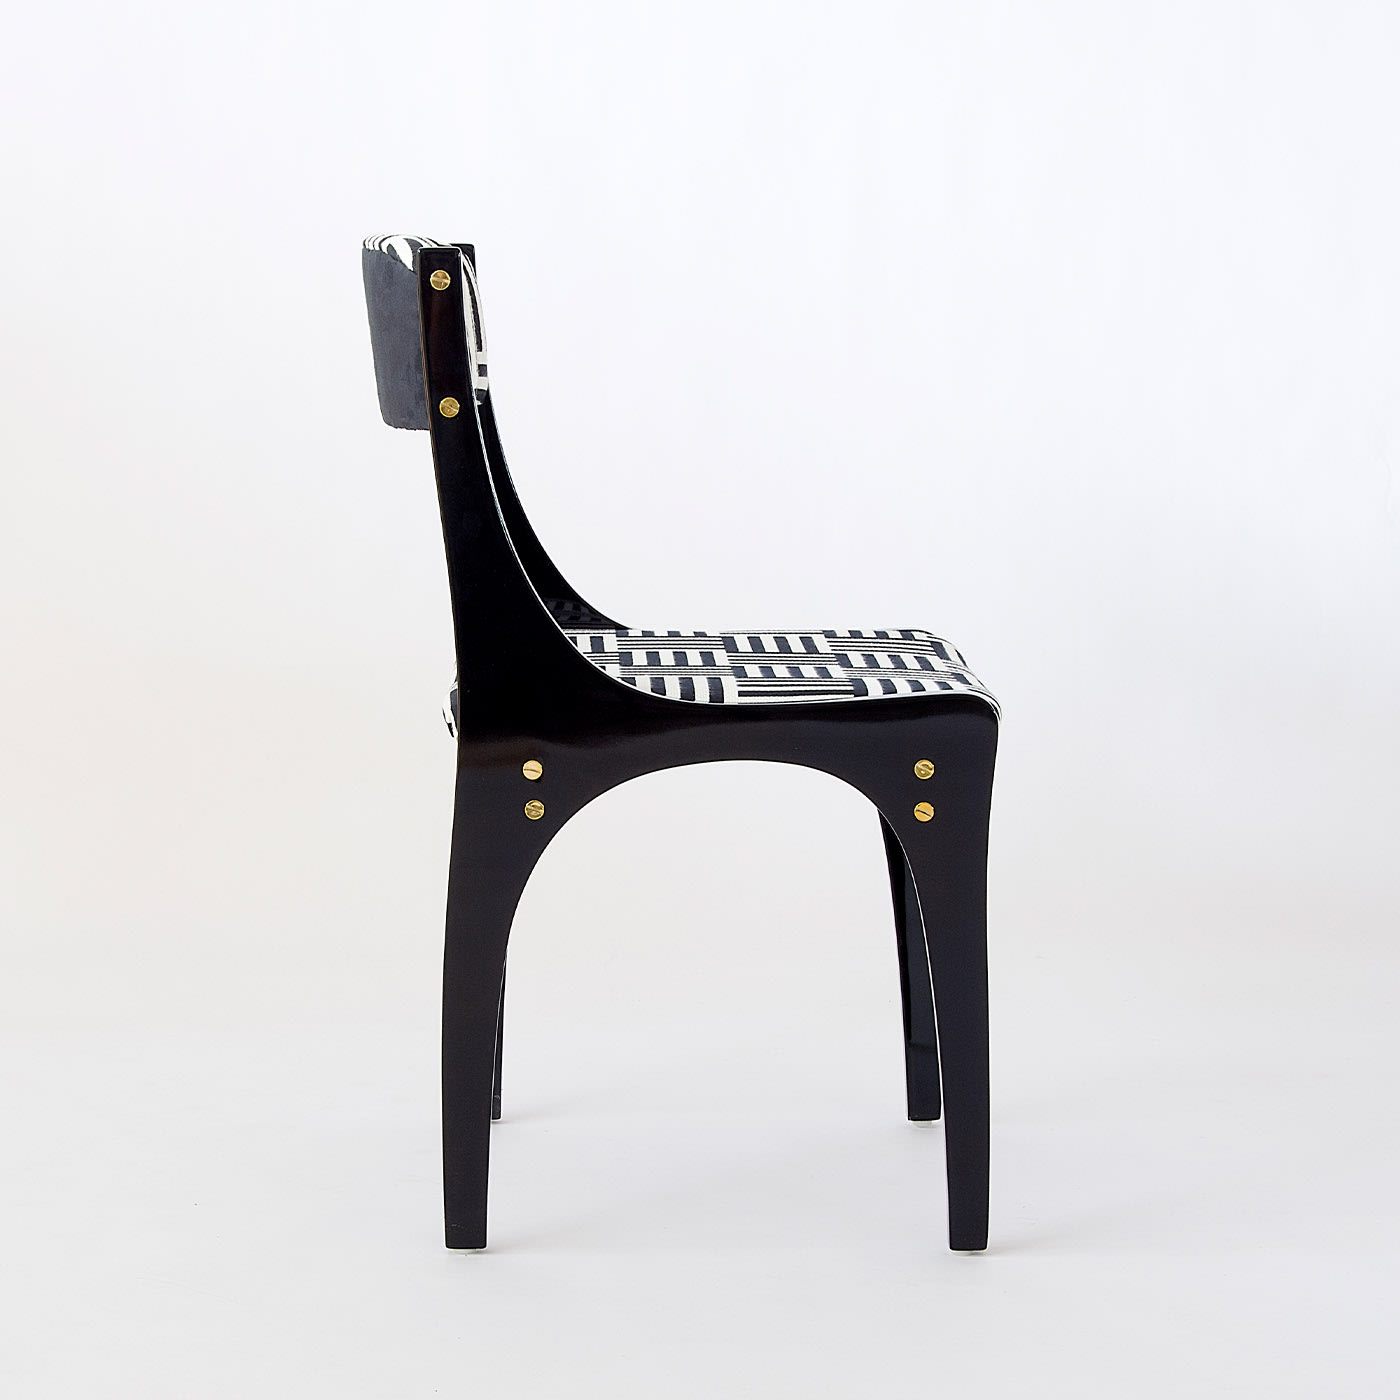 Lola 50's-Inspired Black & White Chair - Extroverso